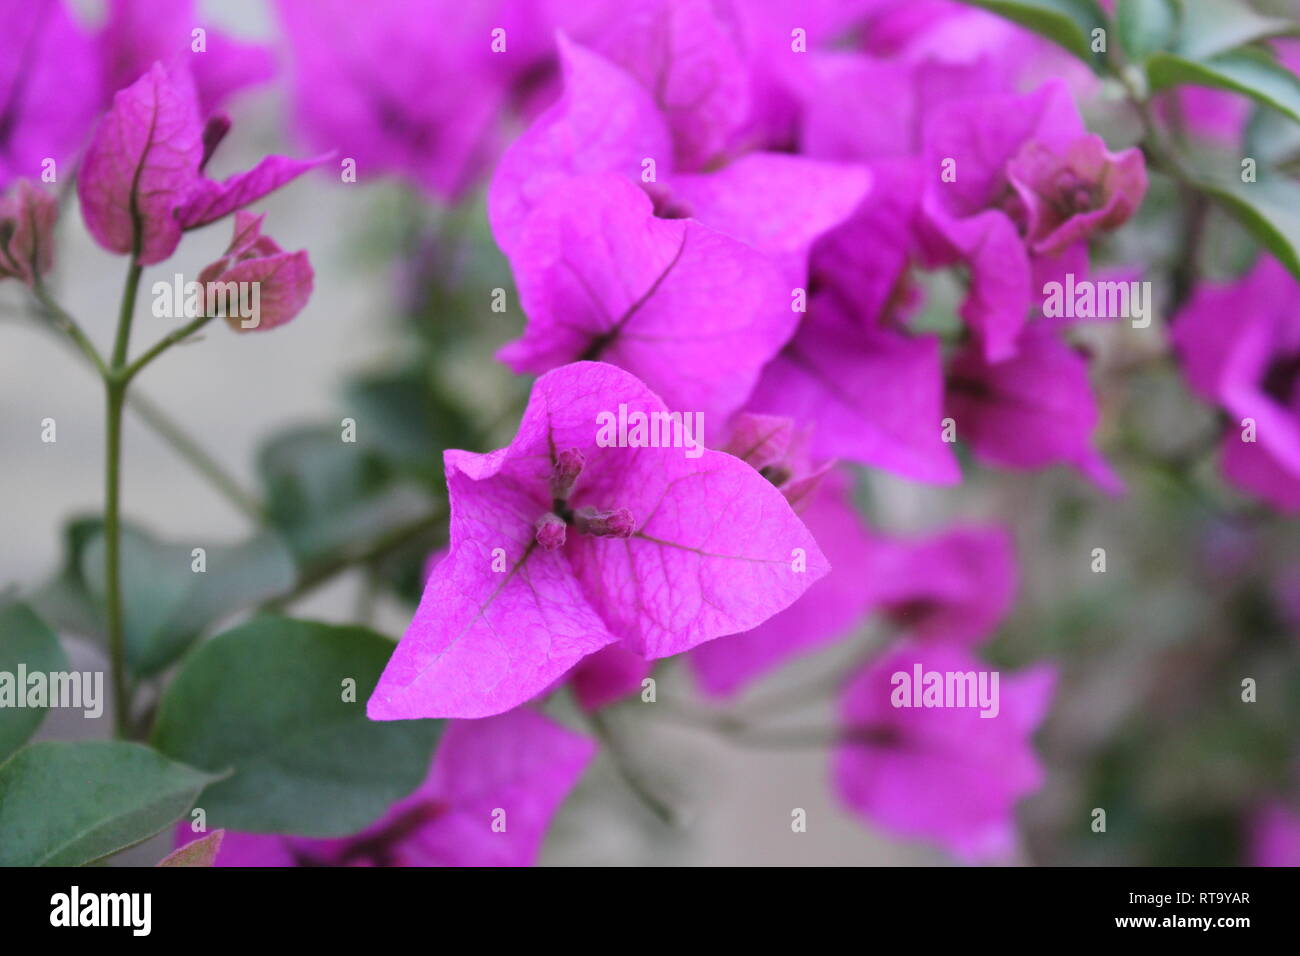 Beautiful cultivated flowering purple bougainvillea plant growing in the garden. Stock Photo